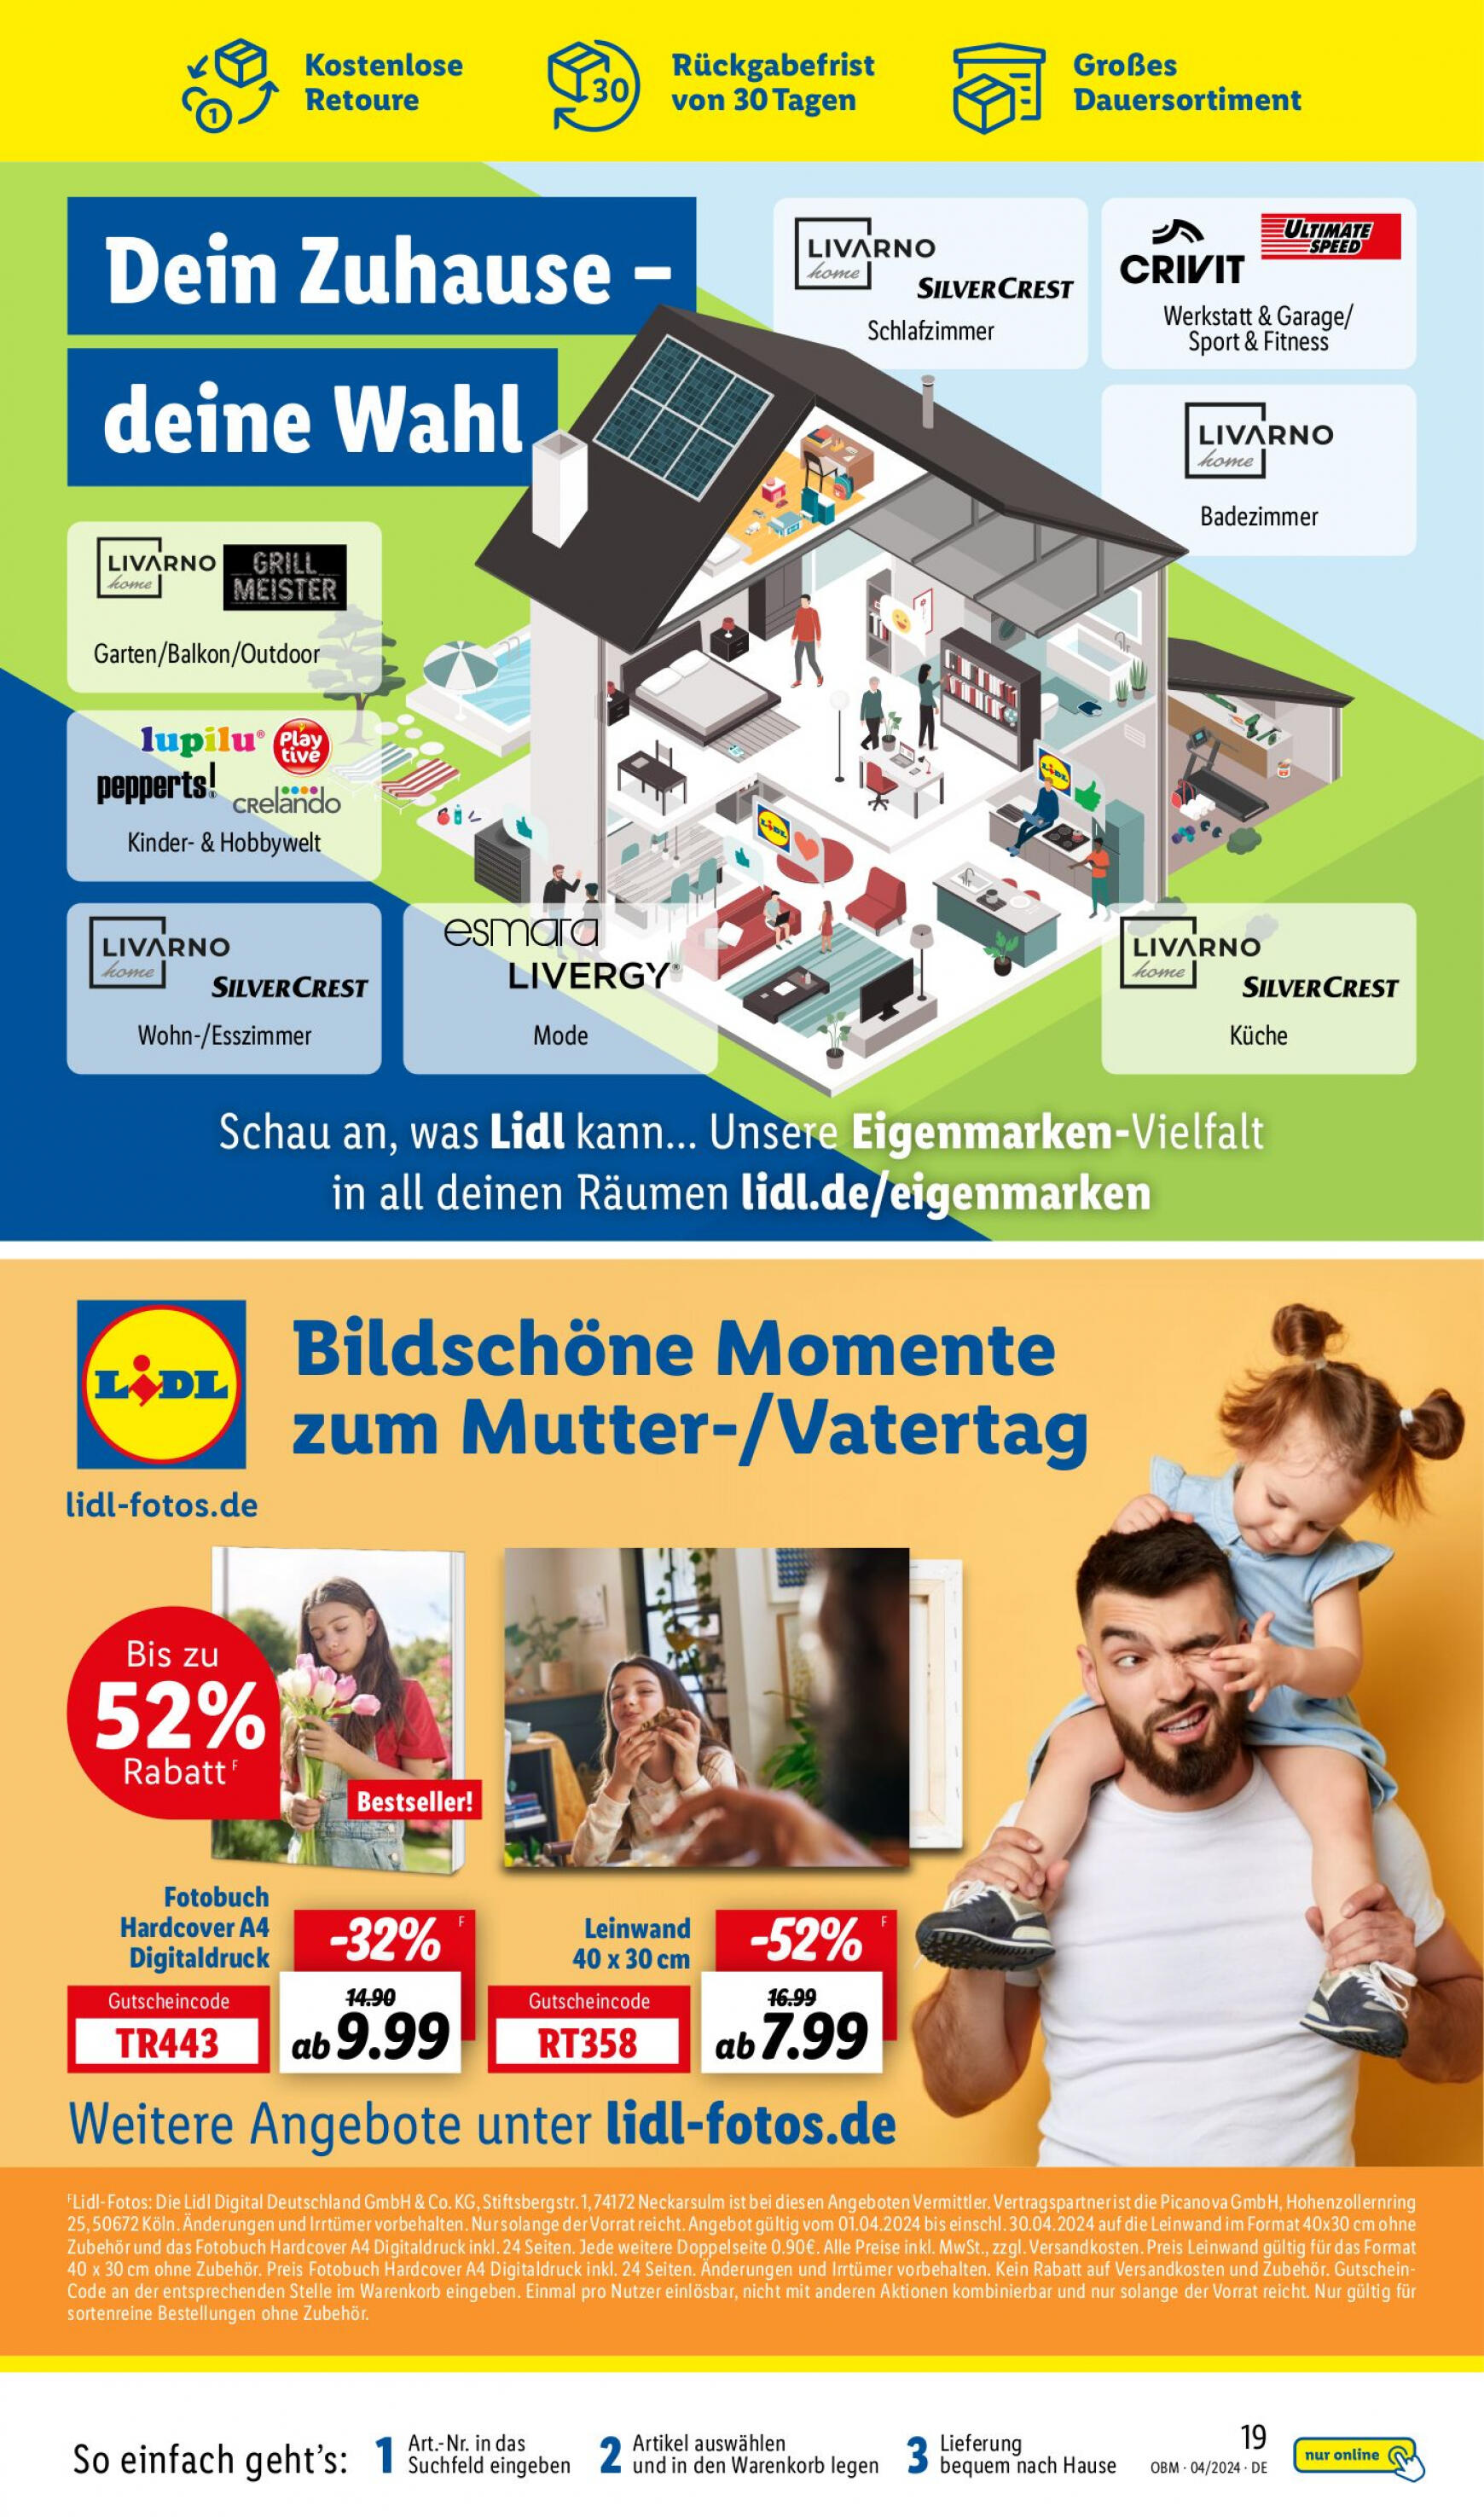 lidl - Flyer Lidl - Aktuelle Onlineshop-Highlights aktuell 01.04. - 30.04. - page: 19